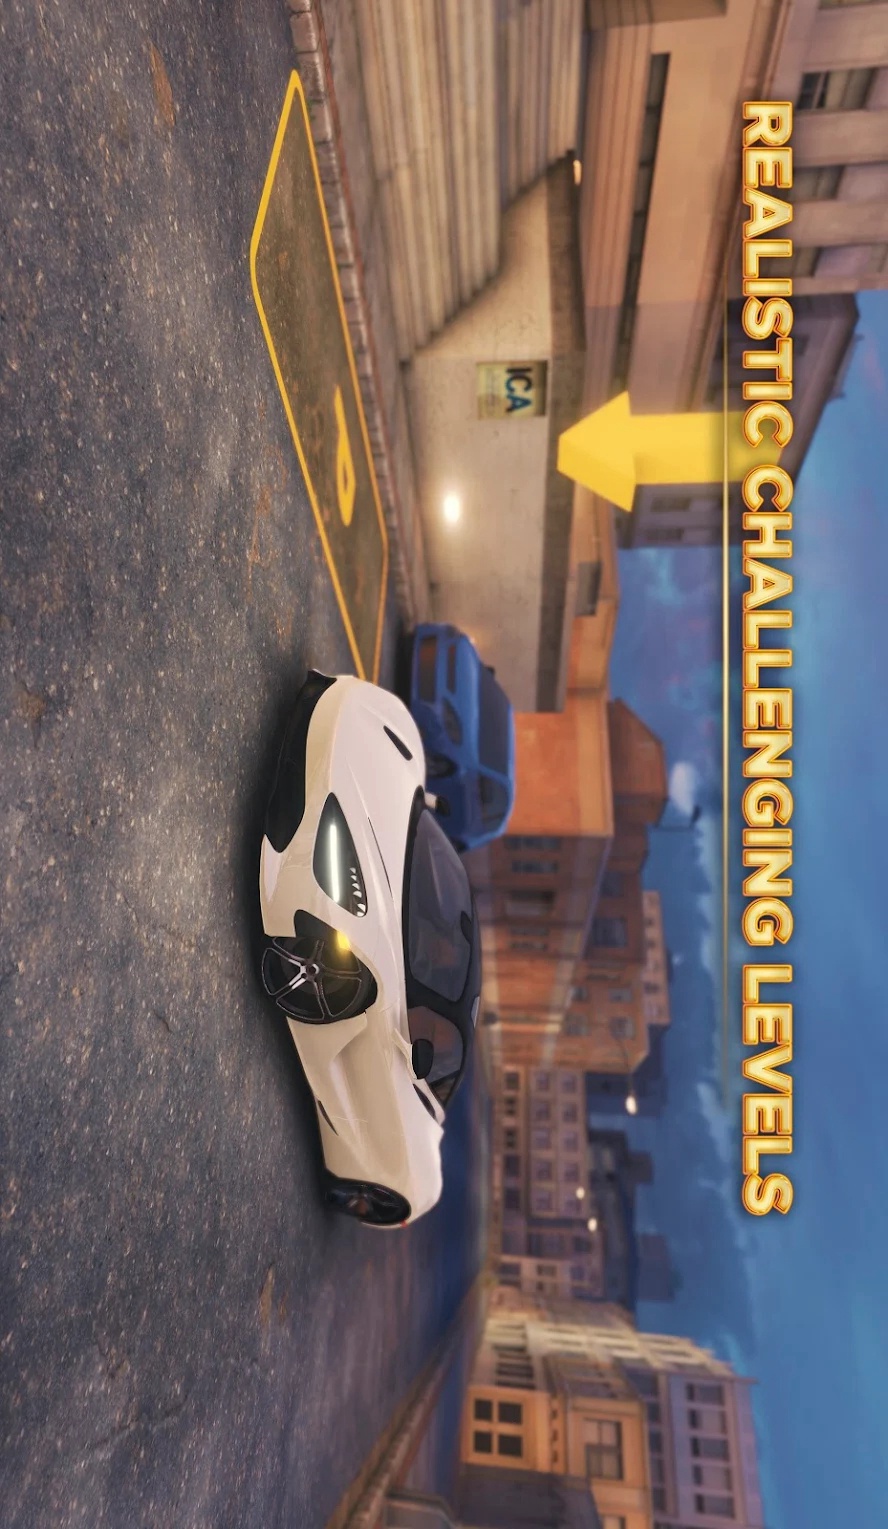 Real Car Parking 2 : Online Multiplayer Driving(Large currency)